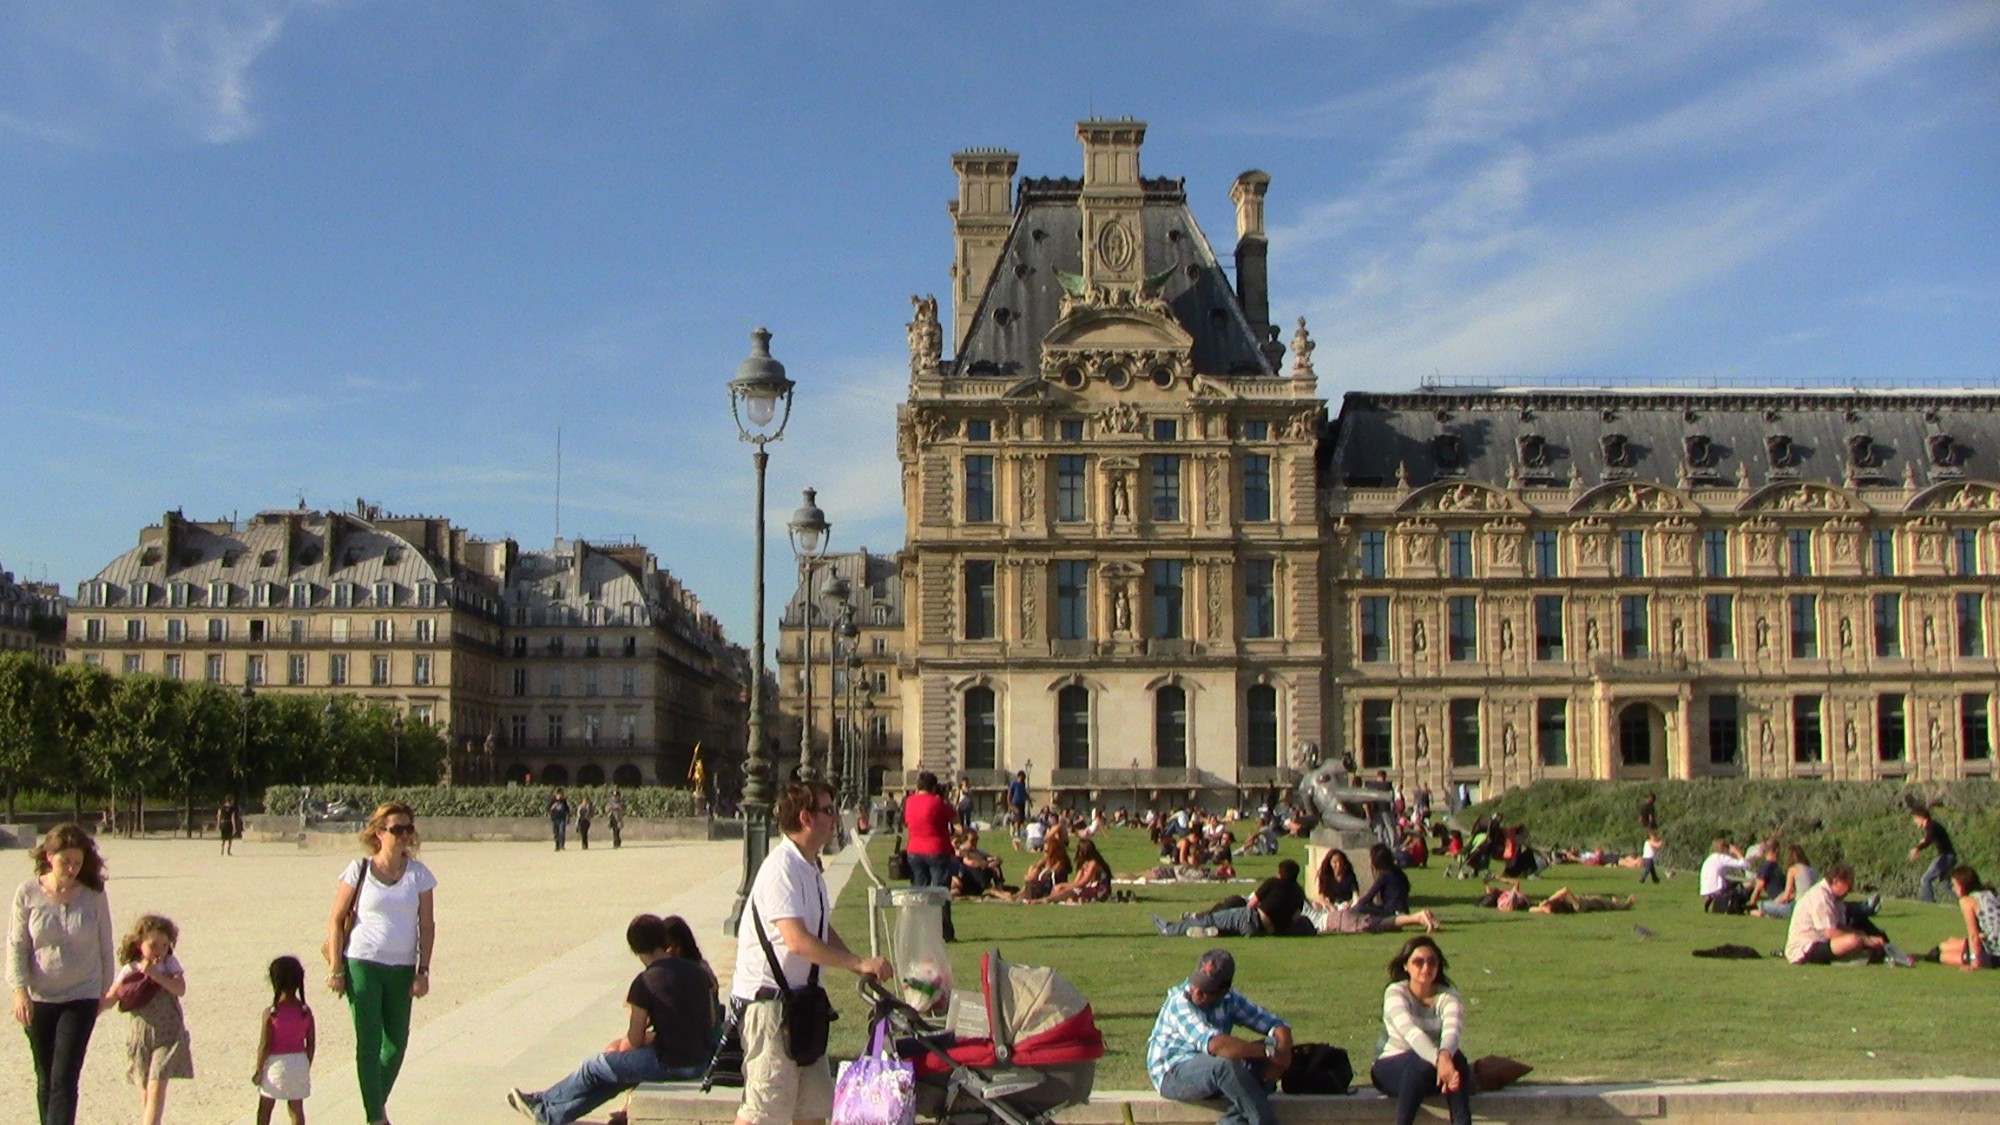 Louvre Palace and Museum where leisurely Parisians enjoy the formal gardens, in the center of Paris, France